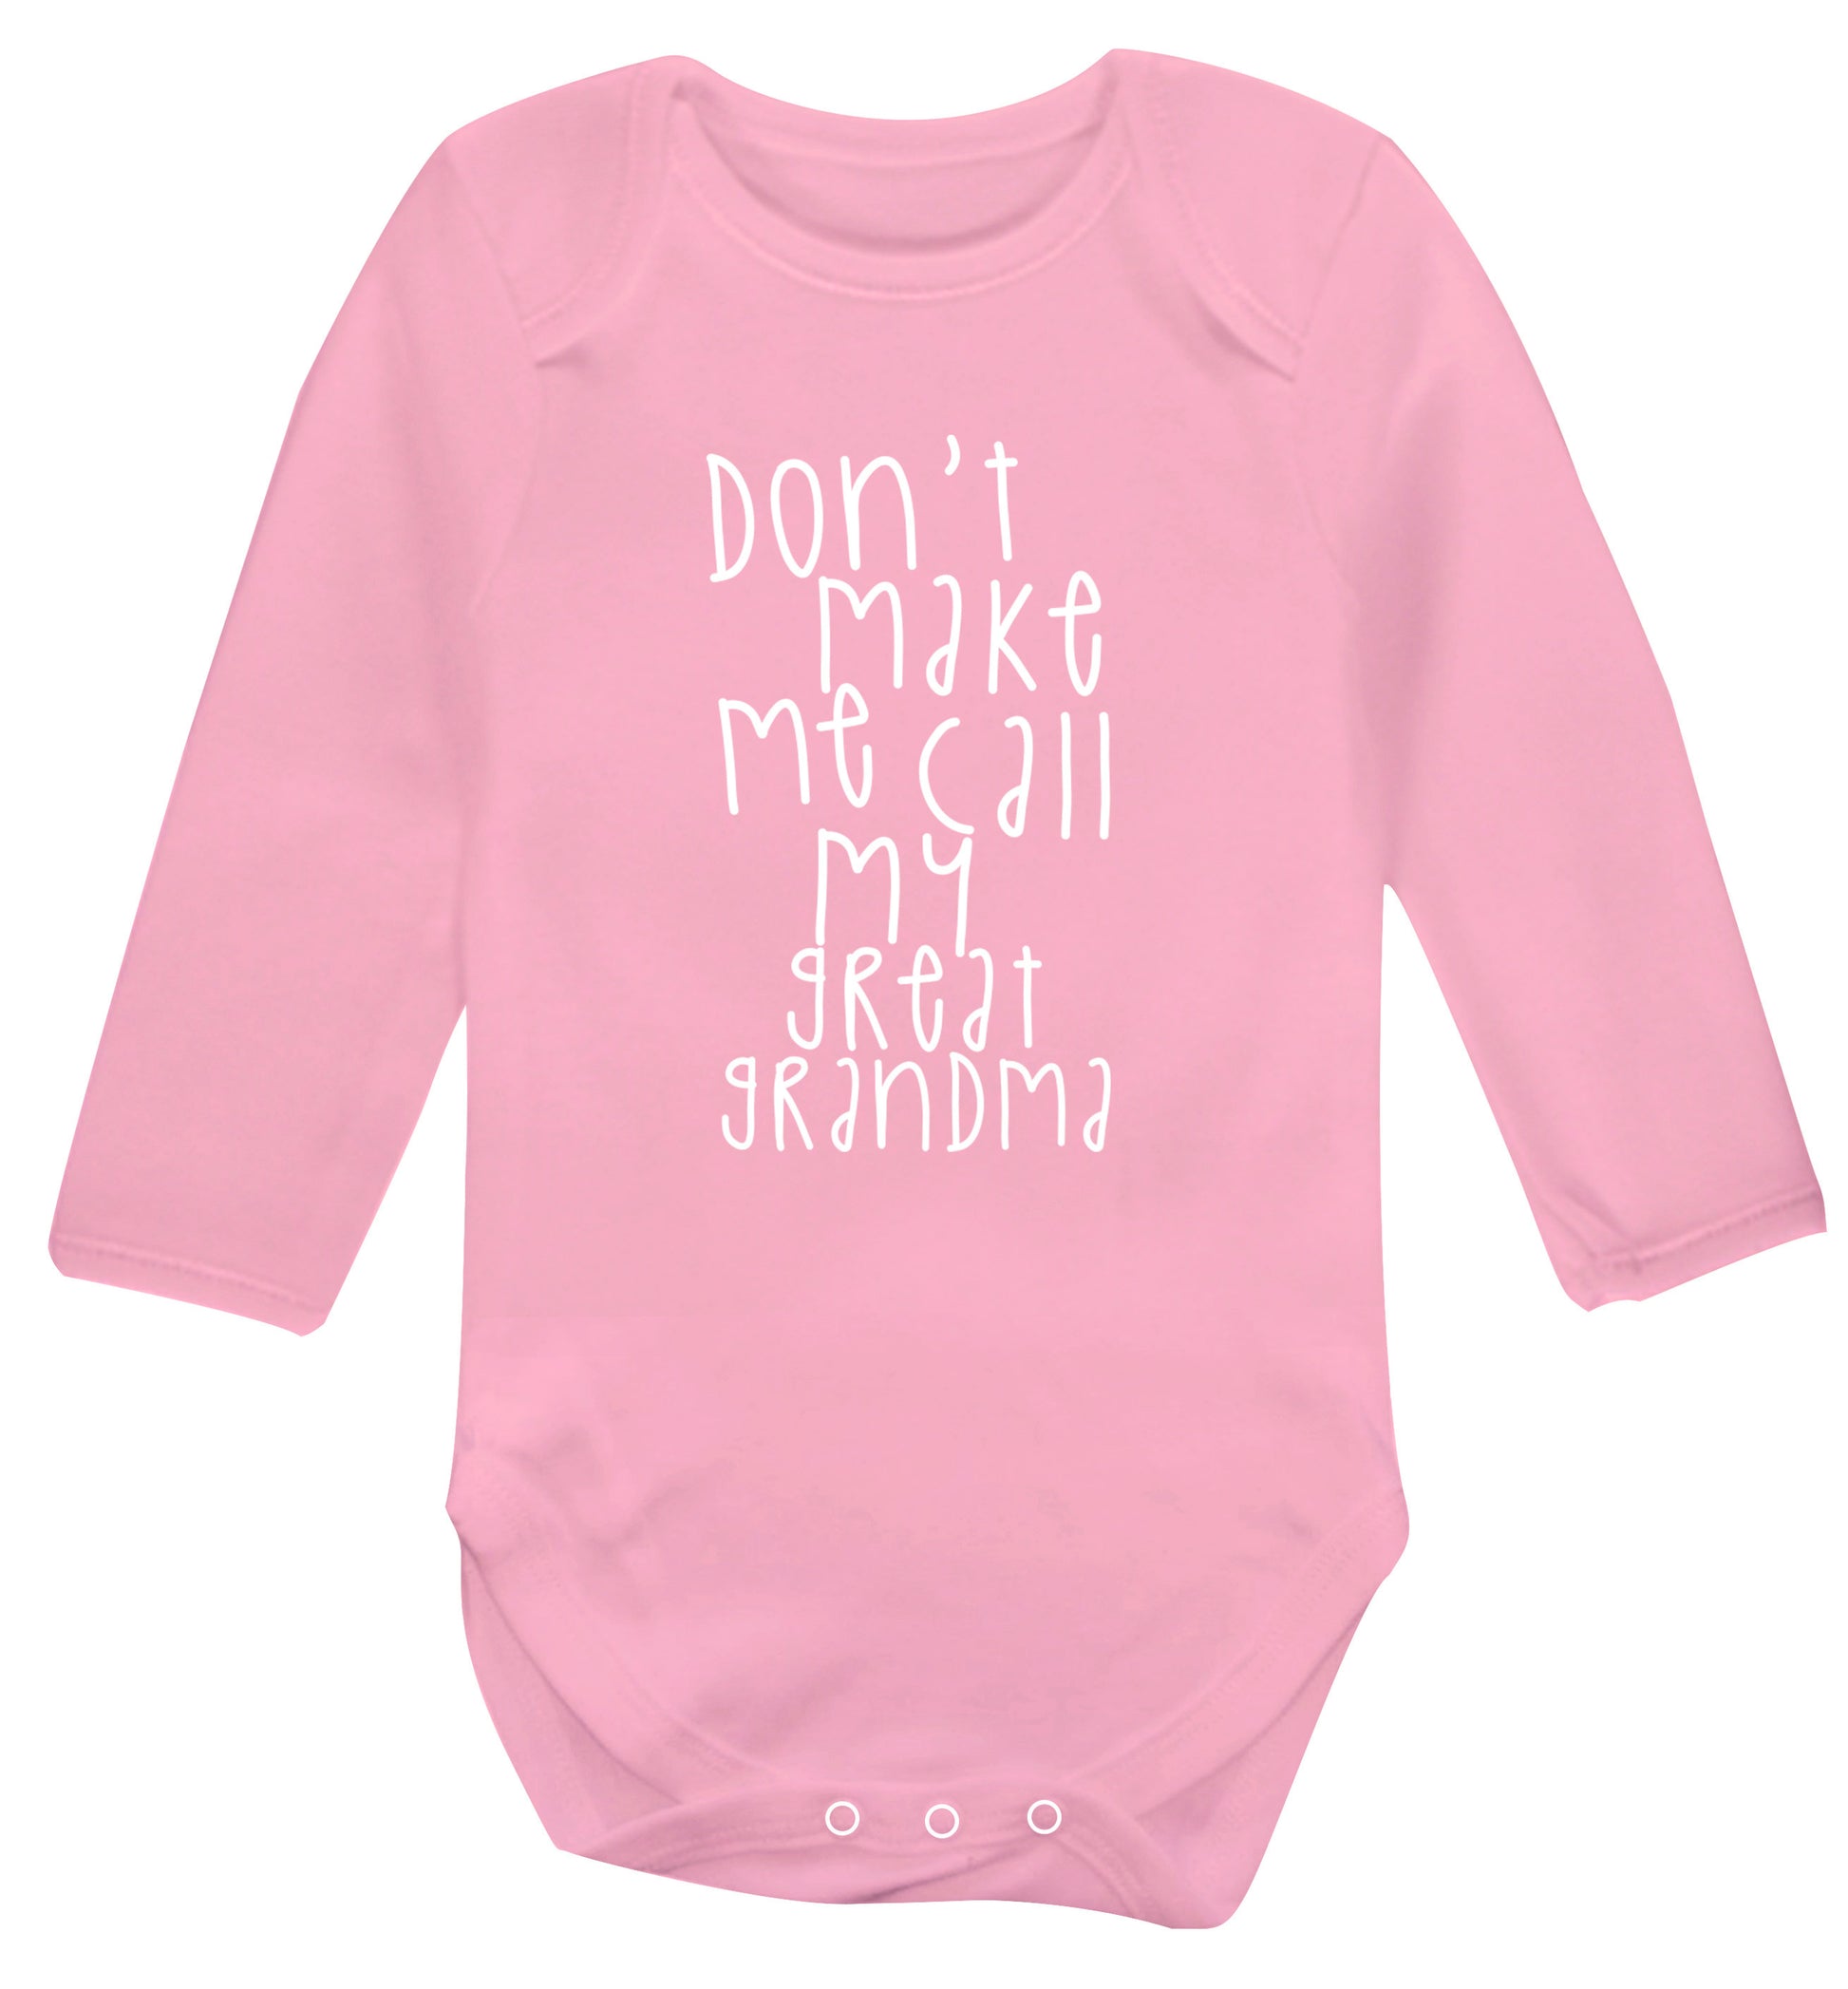 Don't make me call my great grandma Baby Vest long sleeved pale pink 6-12 months